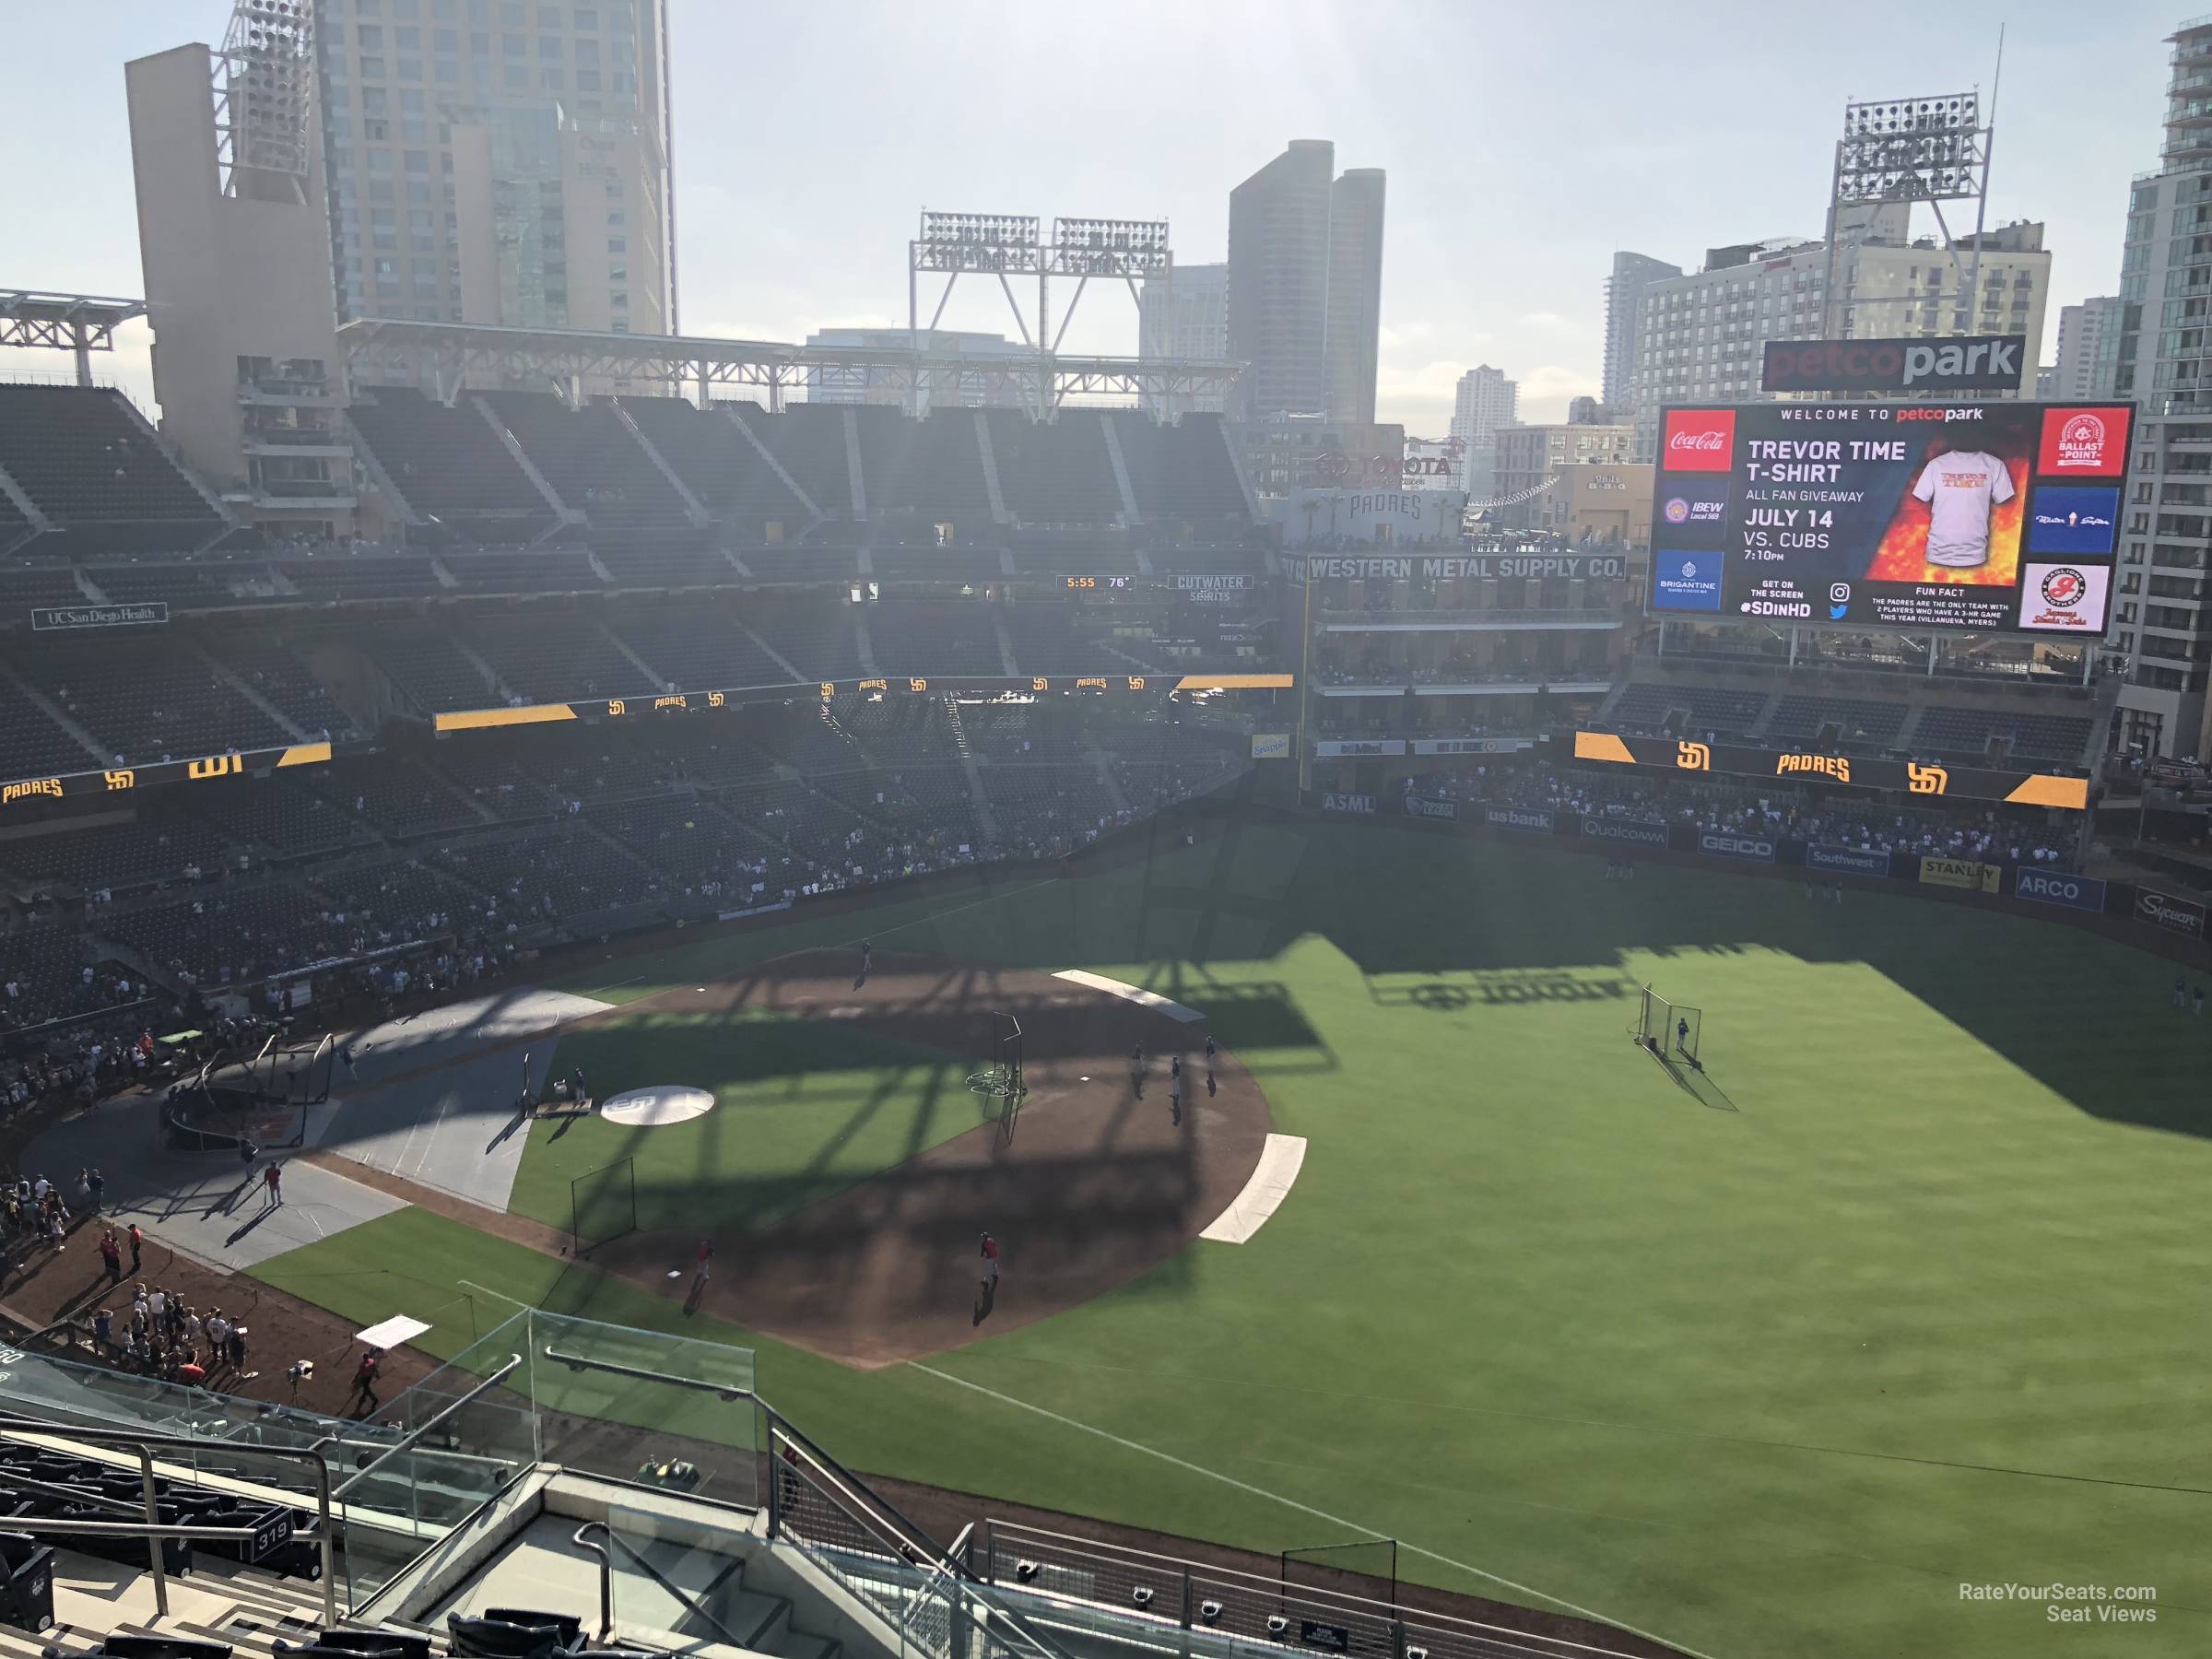 section 319, row 13 seat view  for baseball - petco park